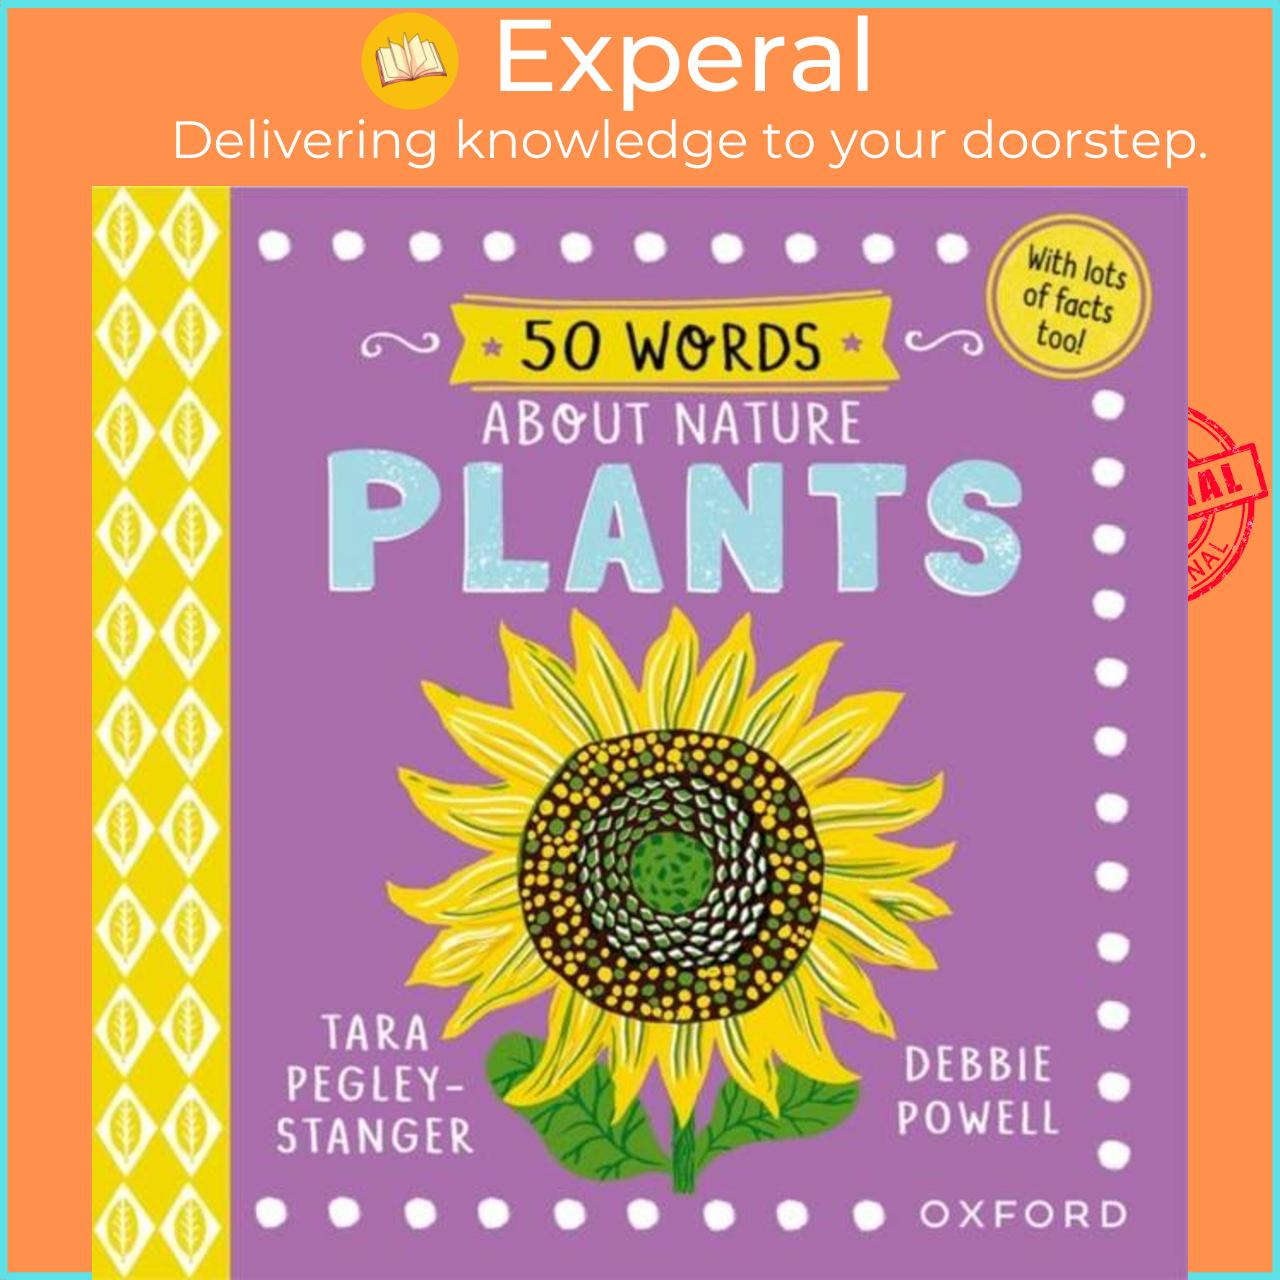 Sách - 50 Words About Nature: Plants by Debbie Powell (UK edition, hardcover)